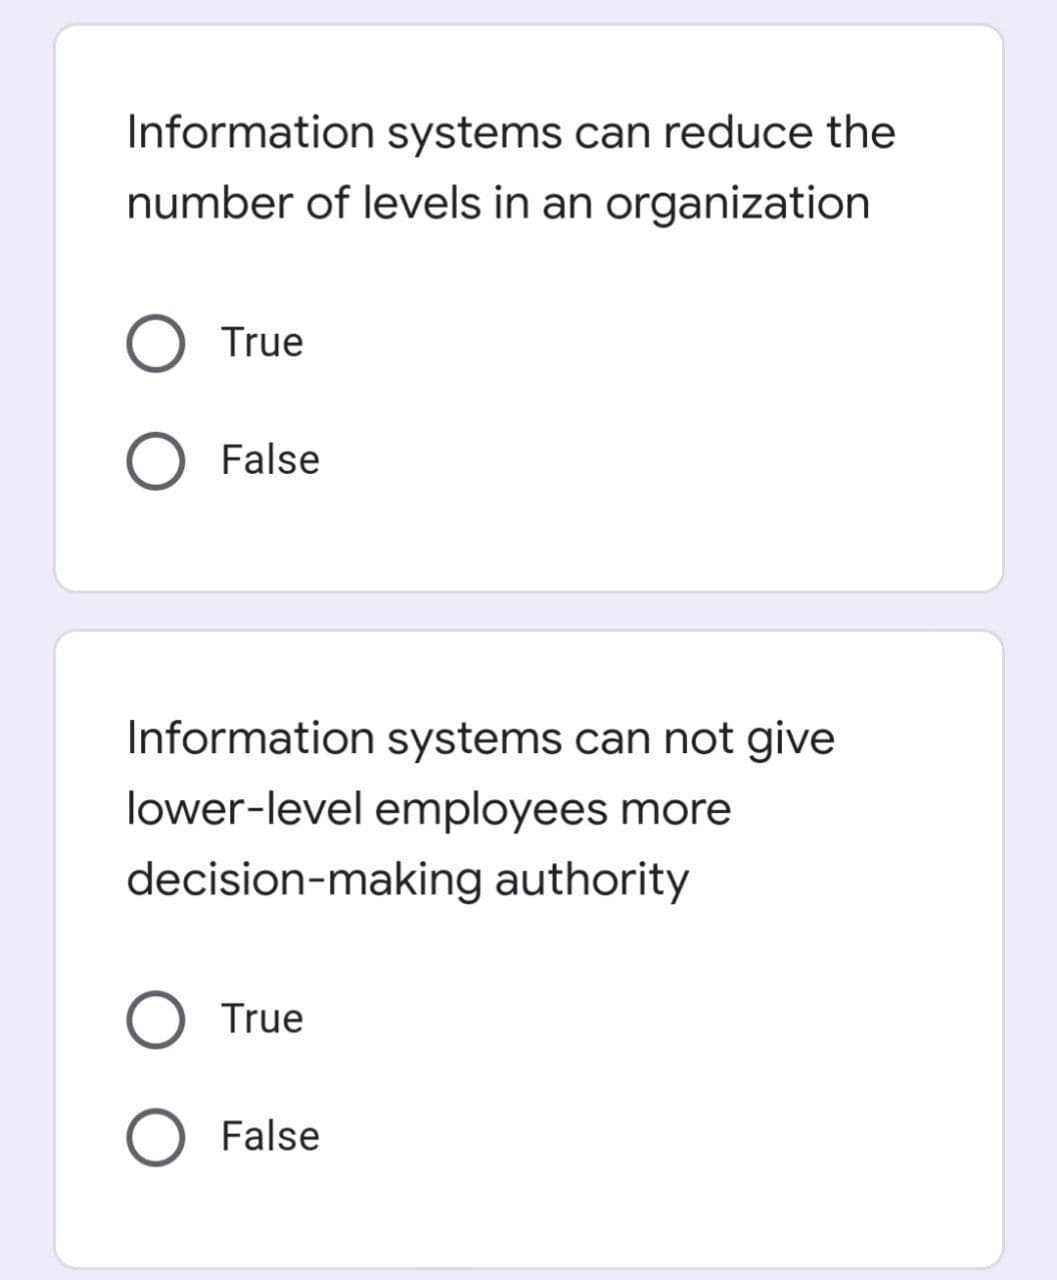 Information systems can reduce the
number of levels in an organization
O True
O False
Information systems can not give
lower-level employees more
decision-making authority
O True
O False